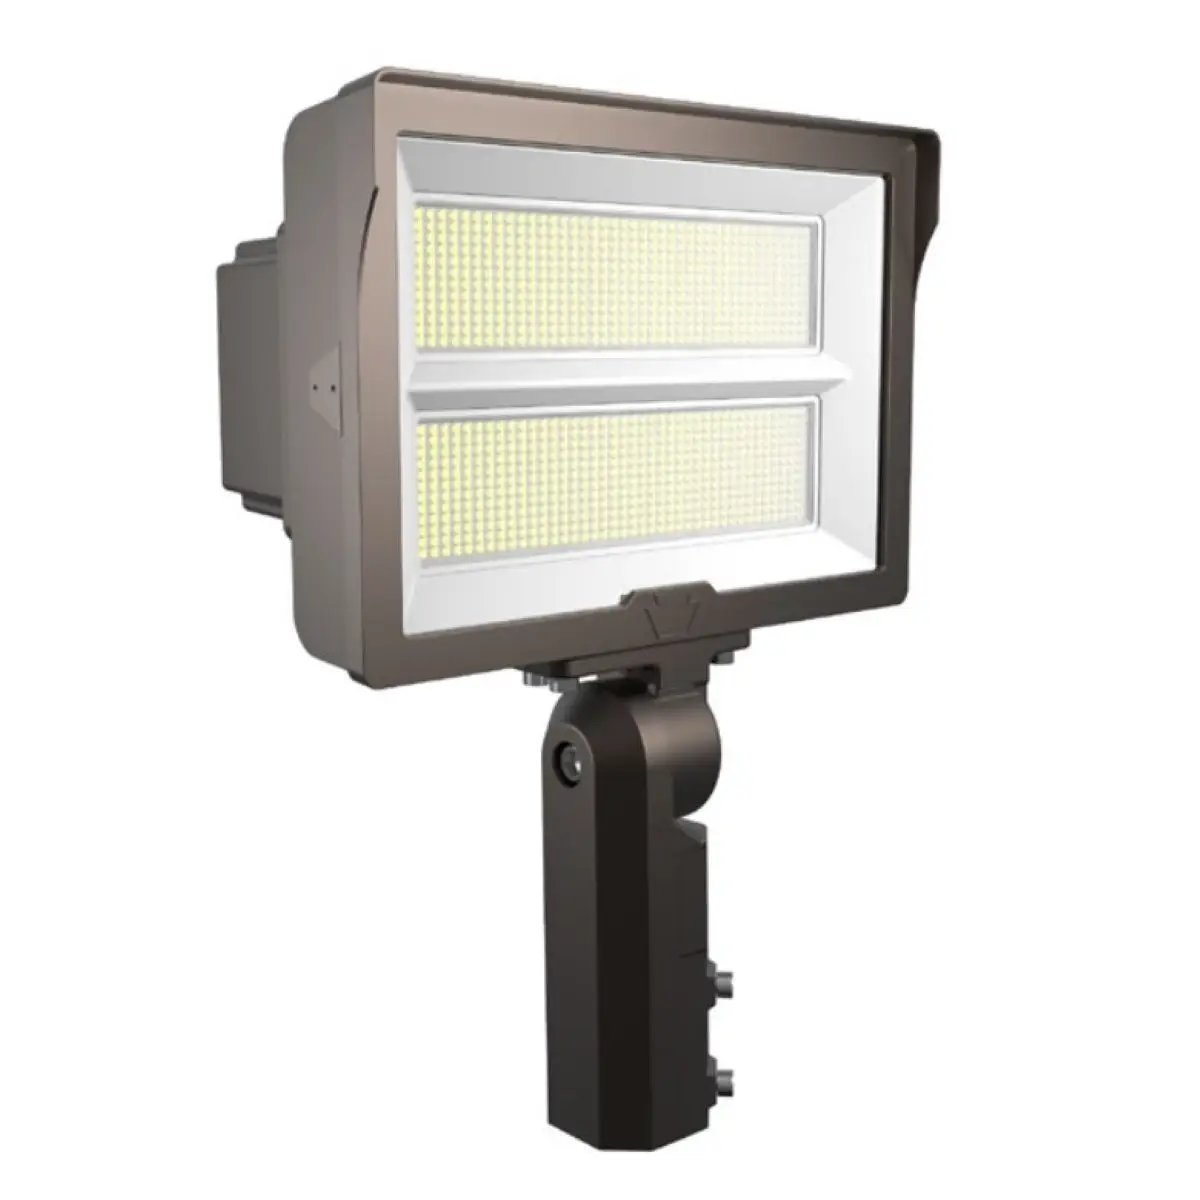 A close-up of a Floodlight, providing powerful and adjustable illumination for spacious areas. Dual mounting options and dimmable features. Ideal for parking lots, building facades, and recreation venues. 29820 to 40600 lumens of CCT tunable white light. Slip Fitter and Trunnion mounts. Keystone Technologies brand.